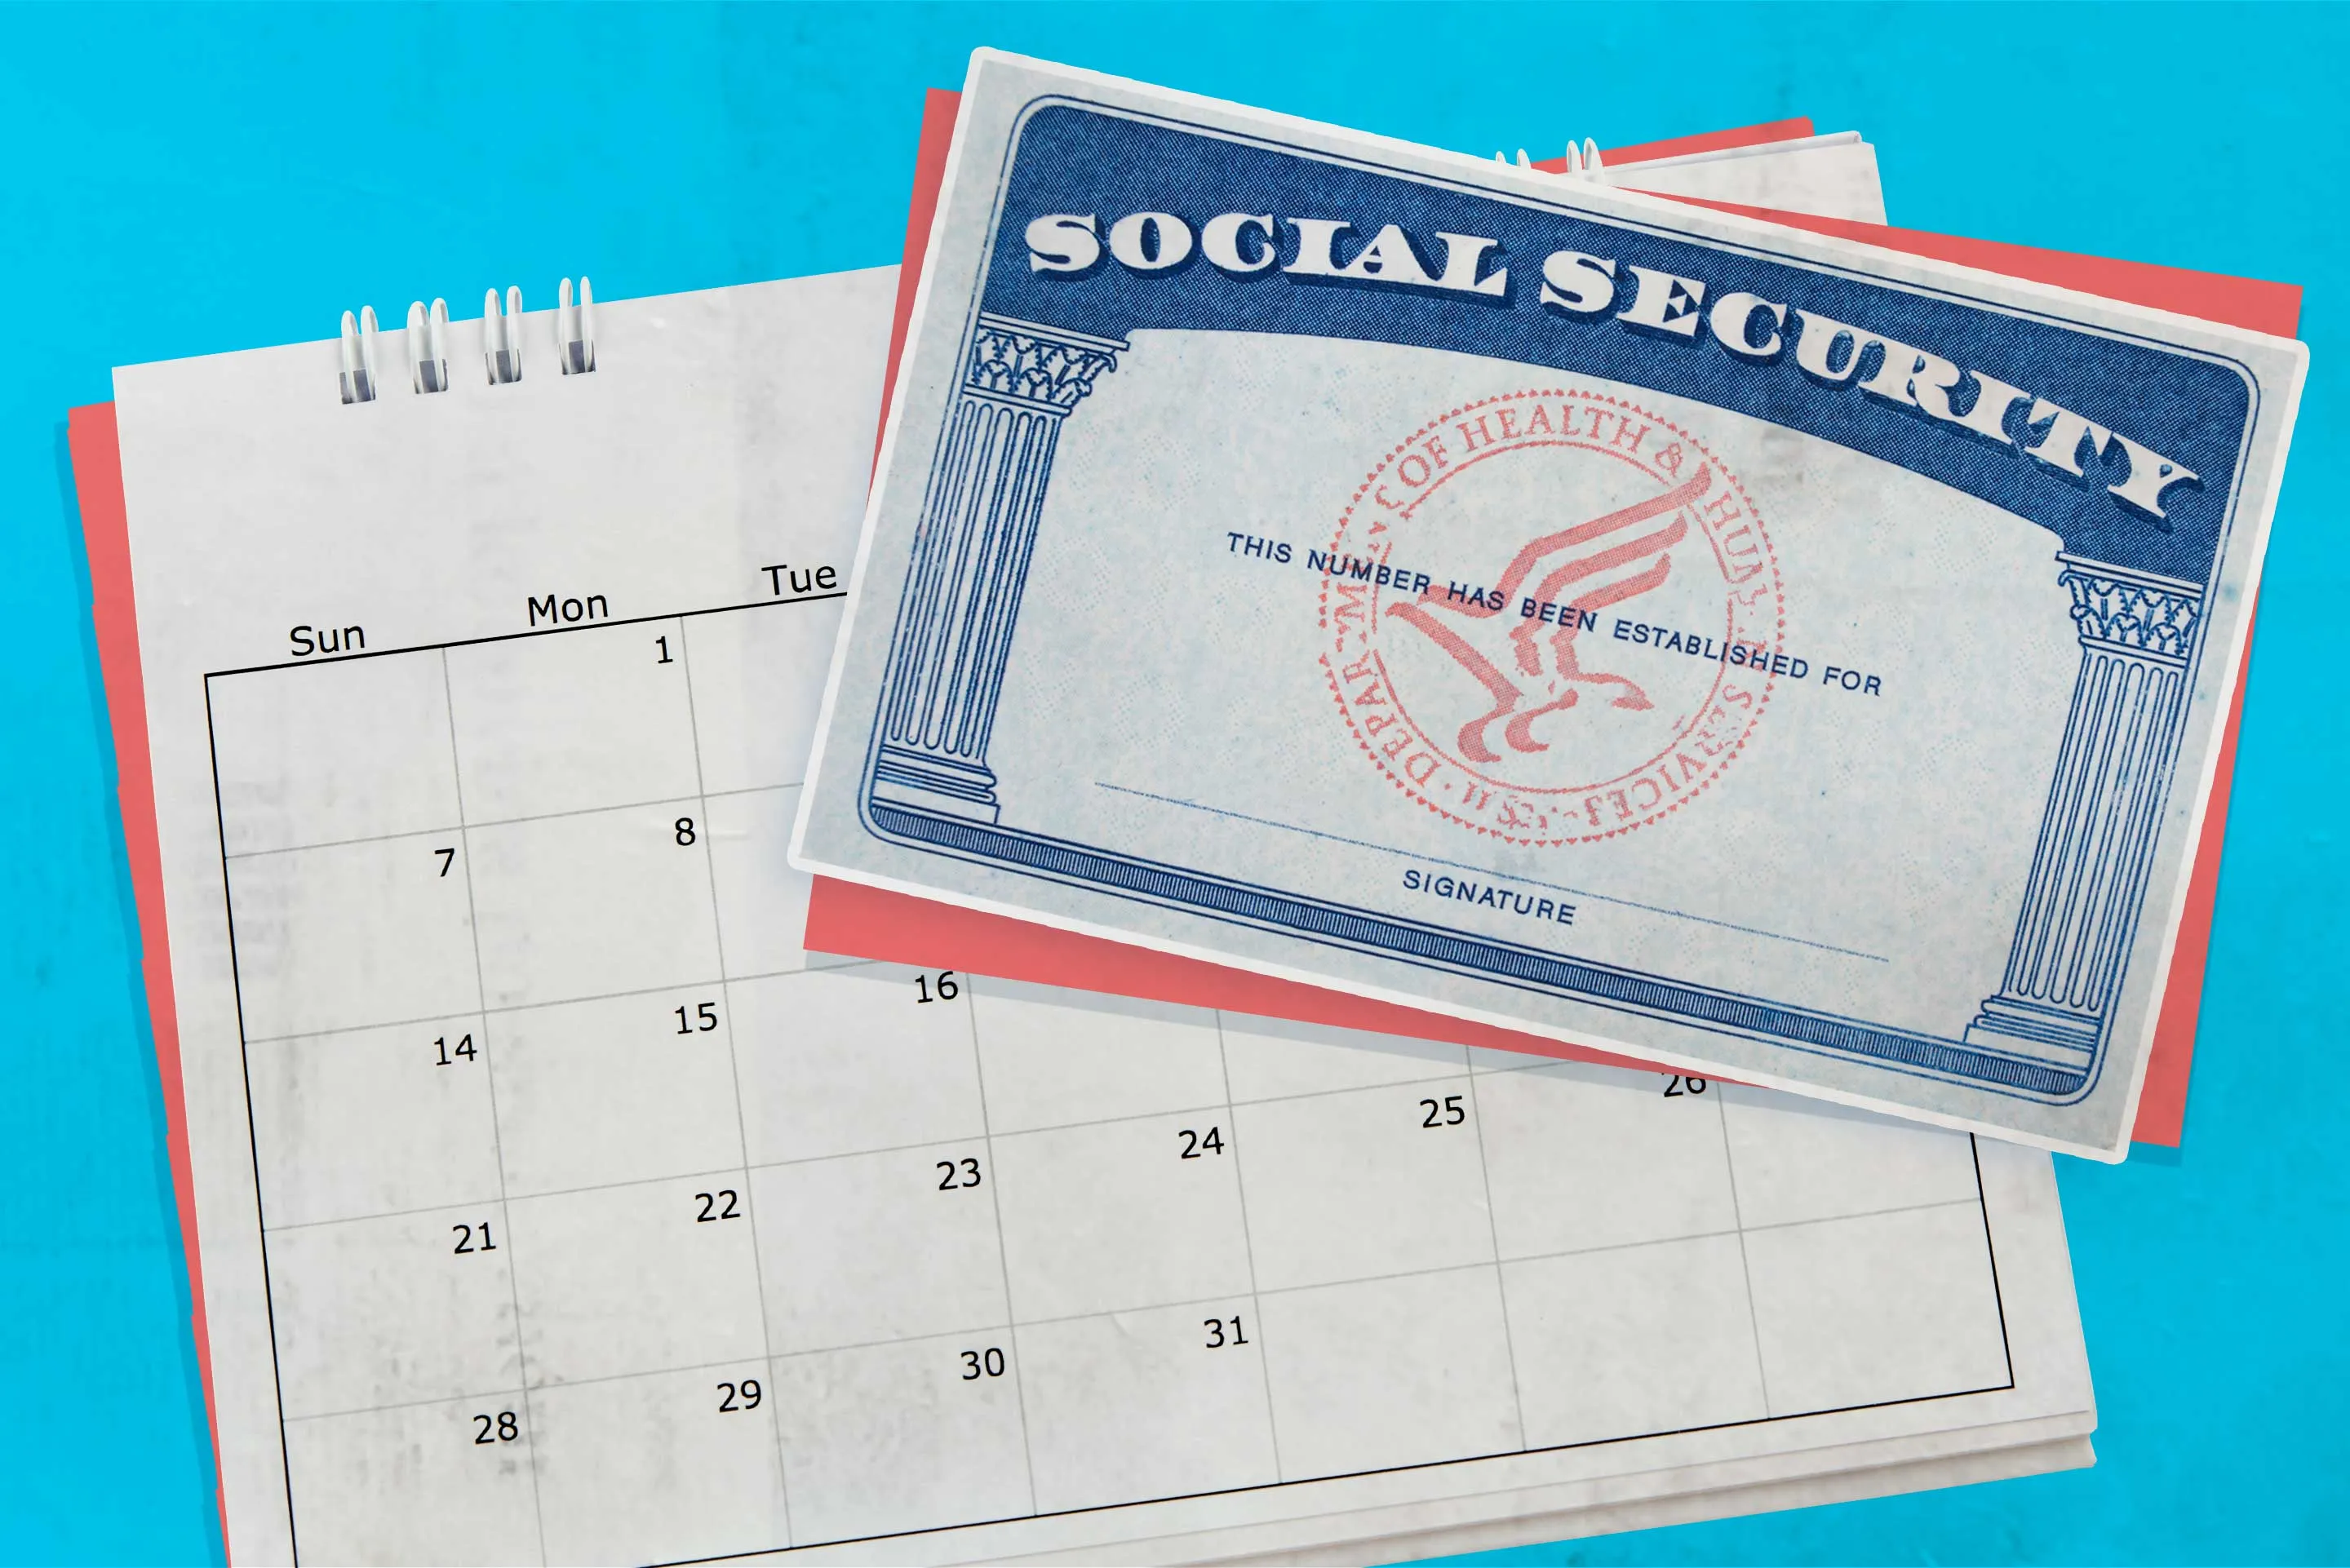 The Date Social Security Will Run Out of Money Just Changed Money